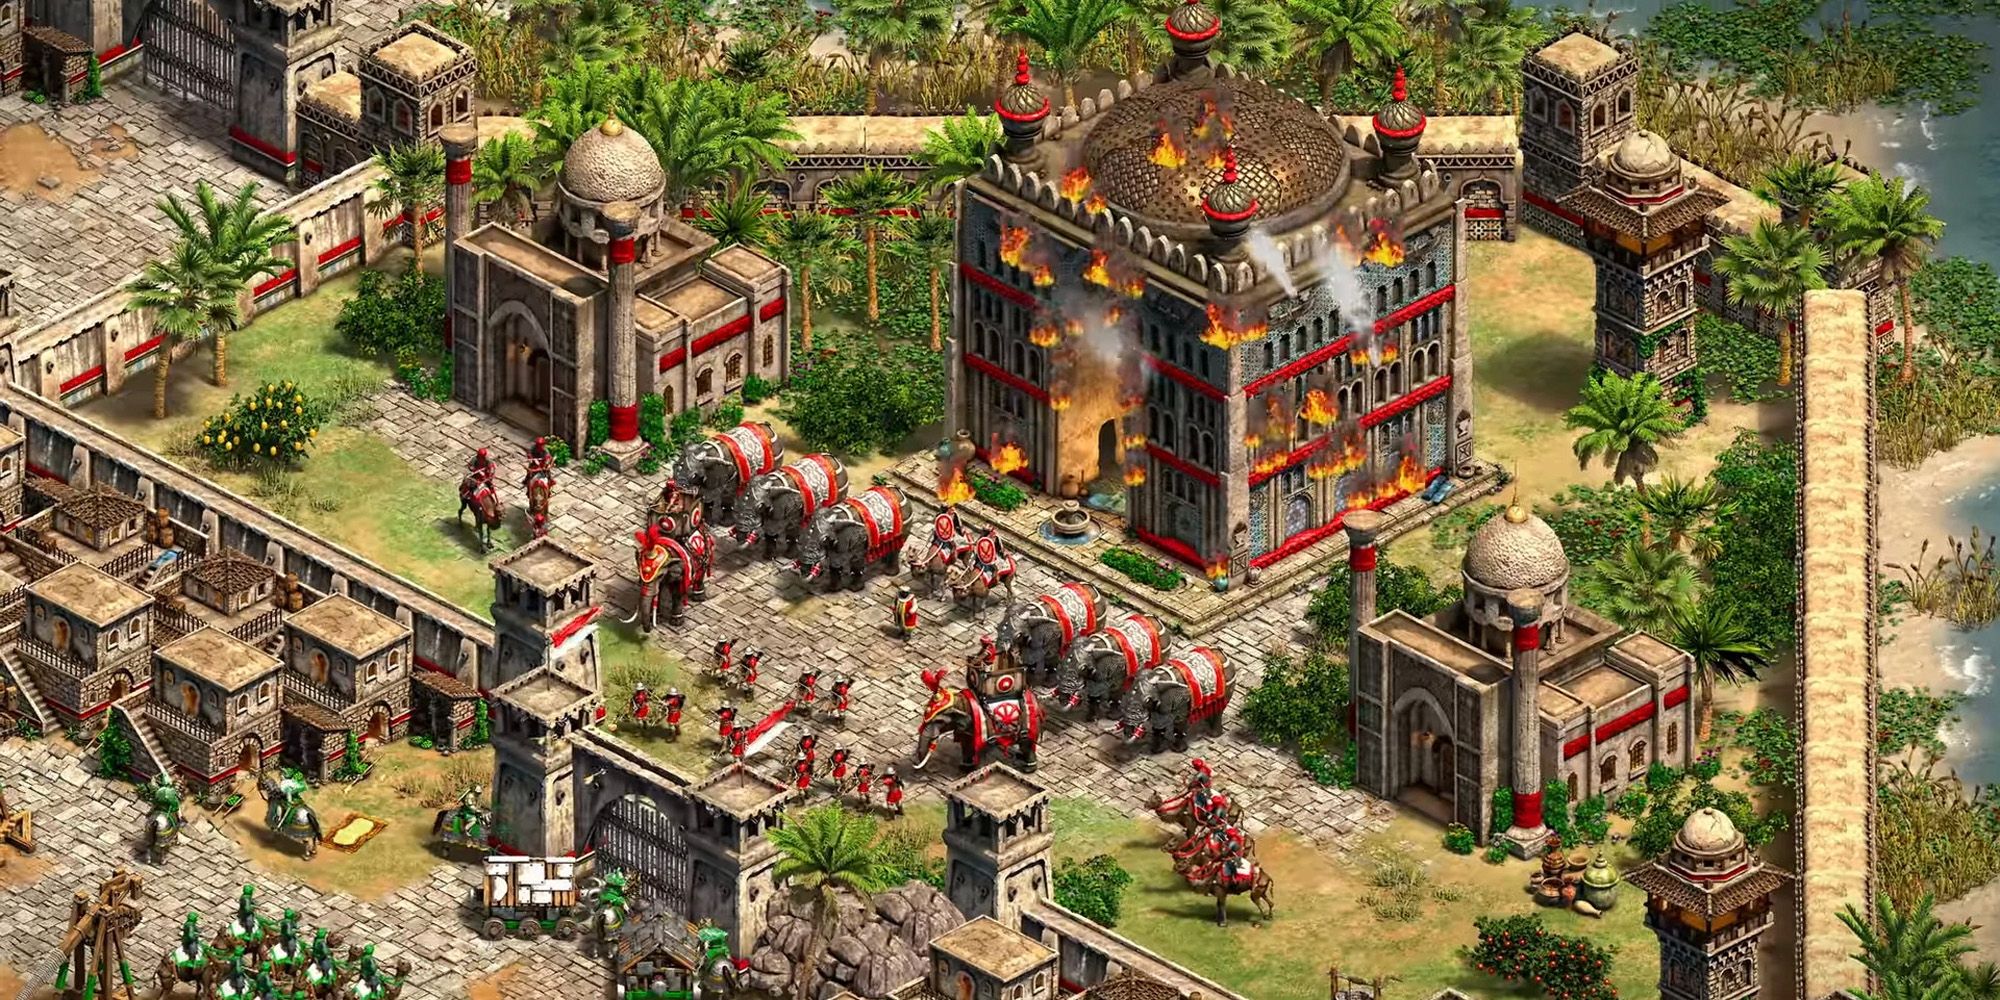 Persian wonder being destroyed but protected by war elephants in age of empires 2